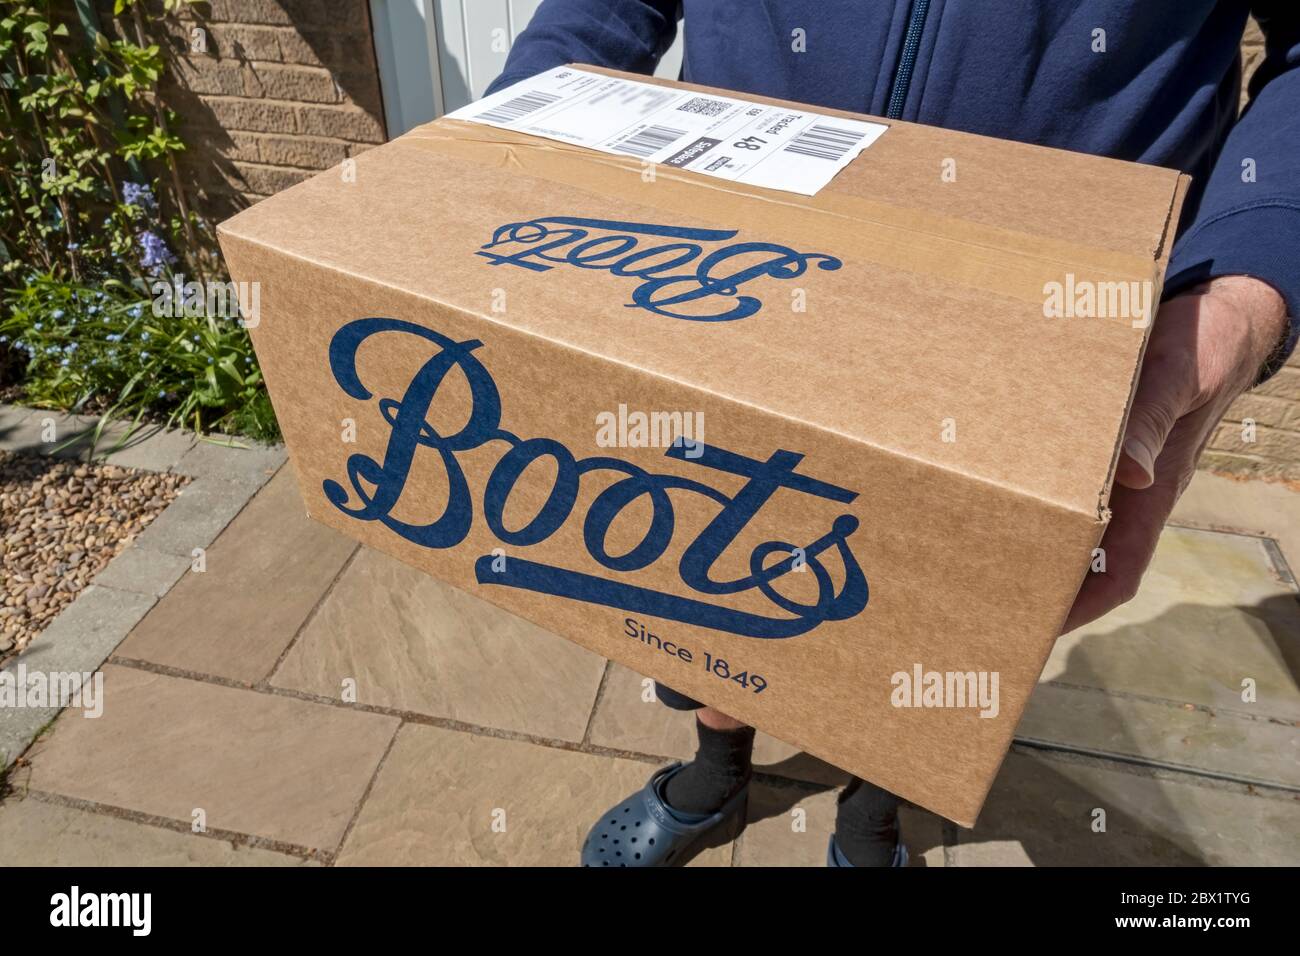 Close up of man carrying holding delivering Boots box internet parcel package home delivery shopping England UK United Kingdom GB Great Britain Stock Photo